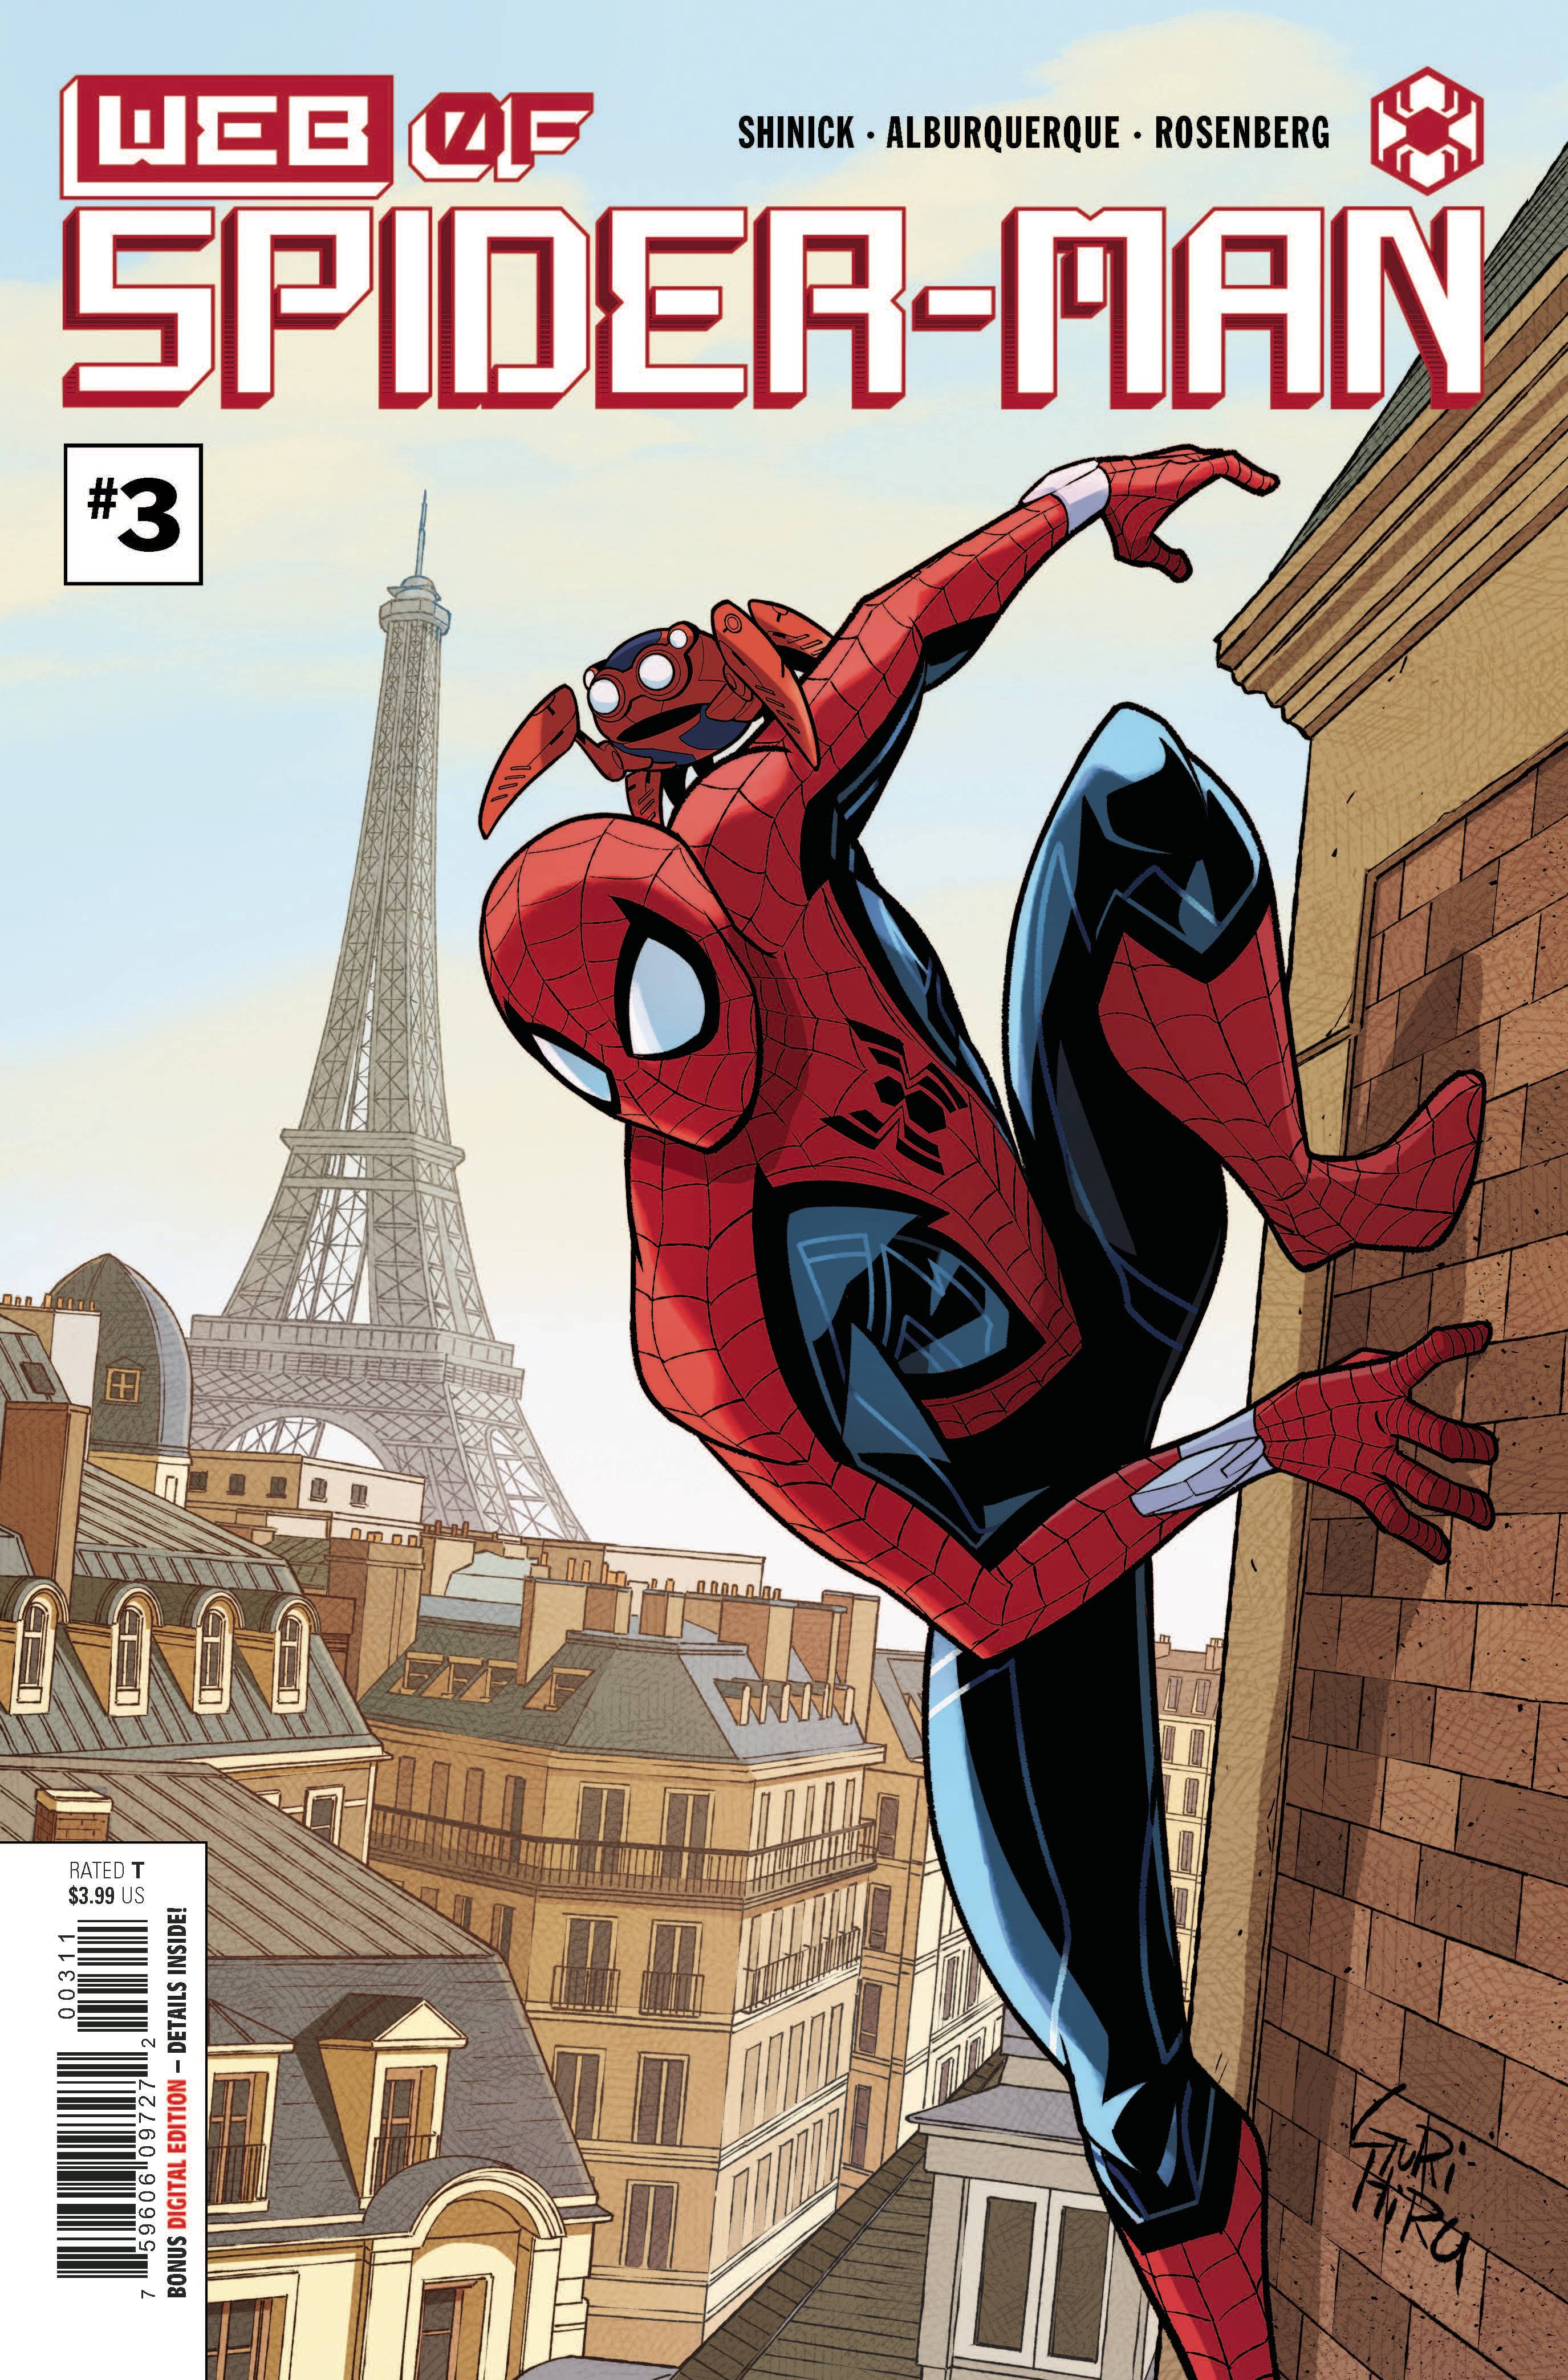 WEB OF SPIDER-MAN #3 (OF 5)